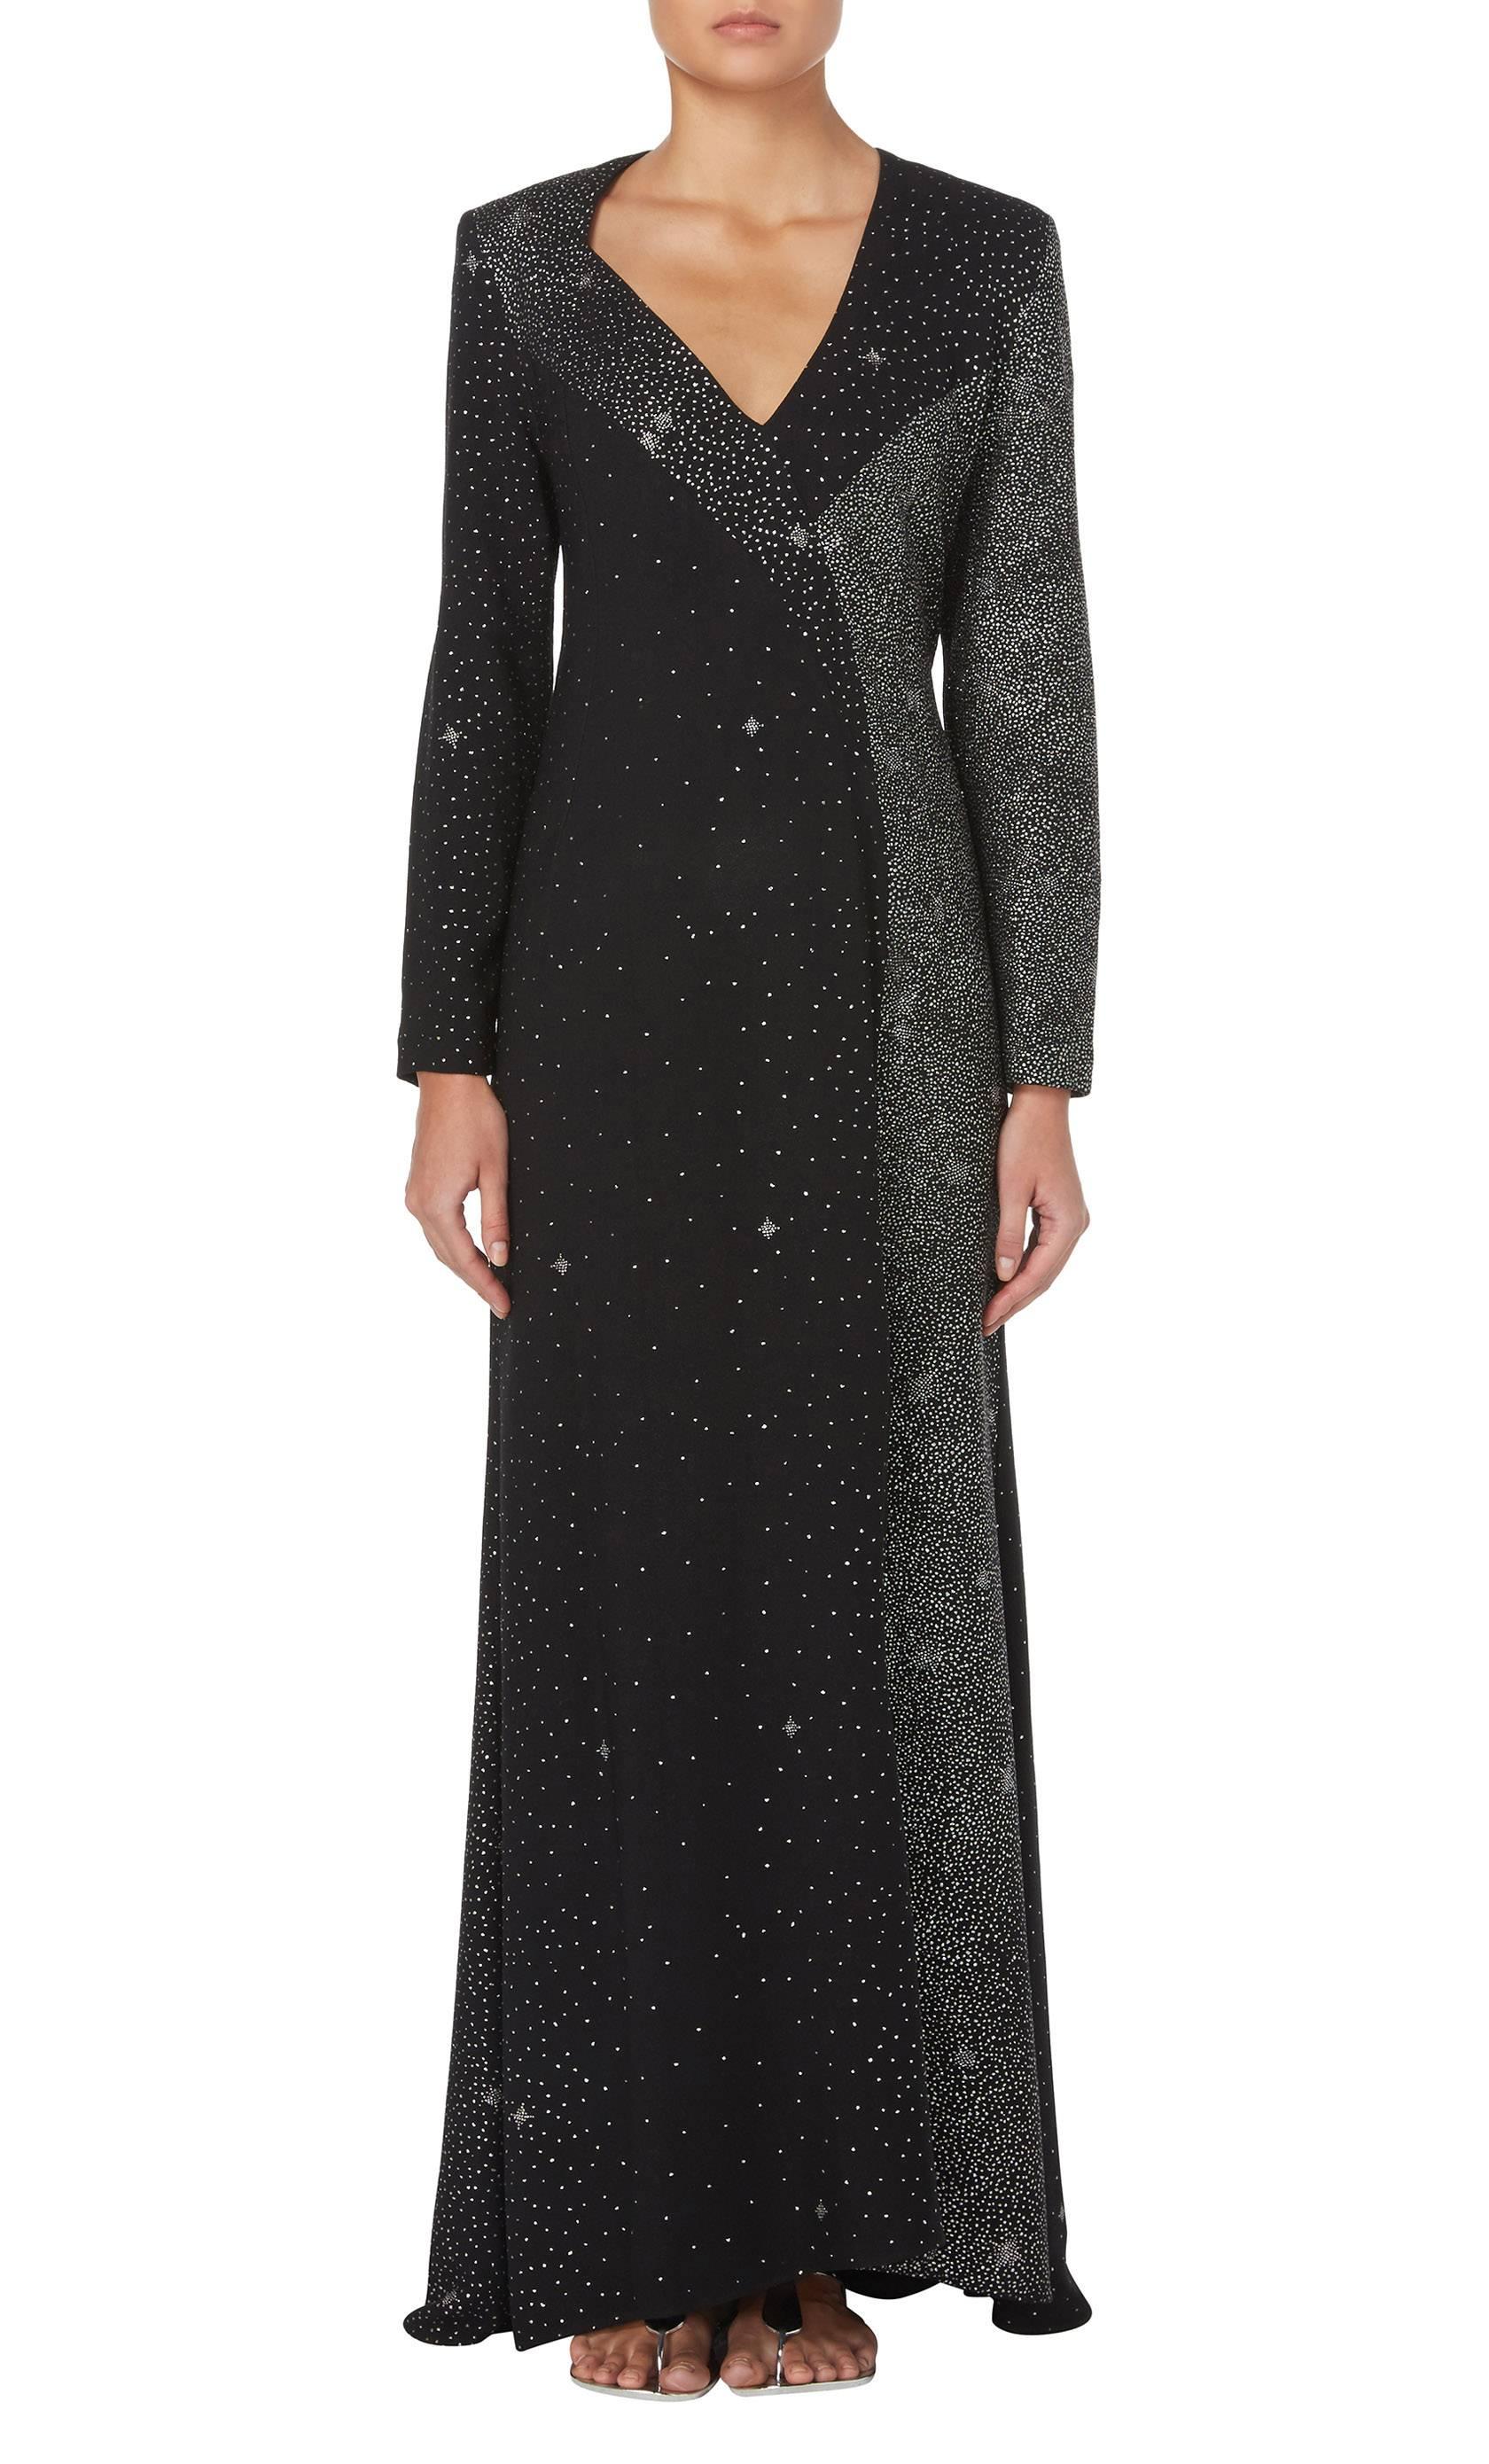 This fabulous evening dress by Christian Lacroix is fantastic option for a black tie event or party. The dress is constructed in black crepe with silver glitter embellishment, creating the effect of constellations in the night sky. Featuring a deep